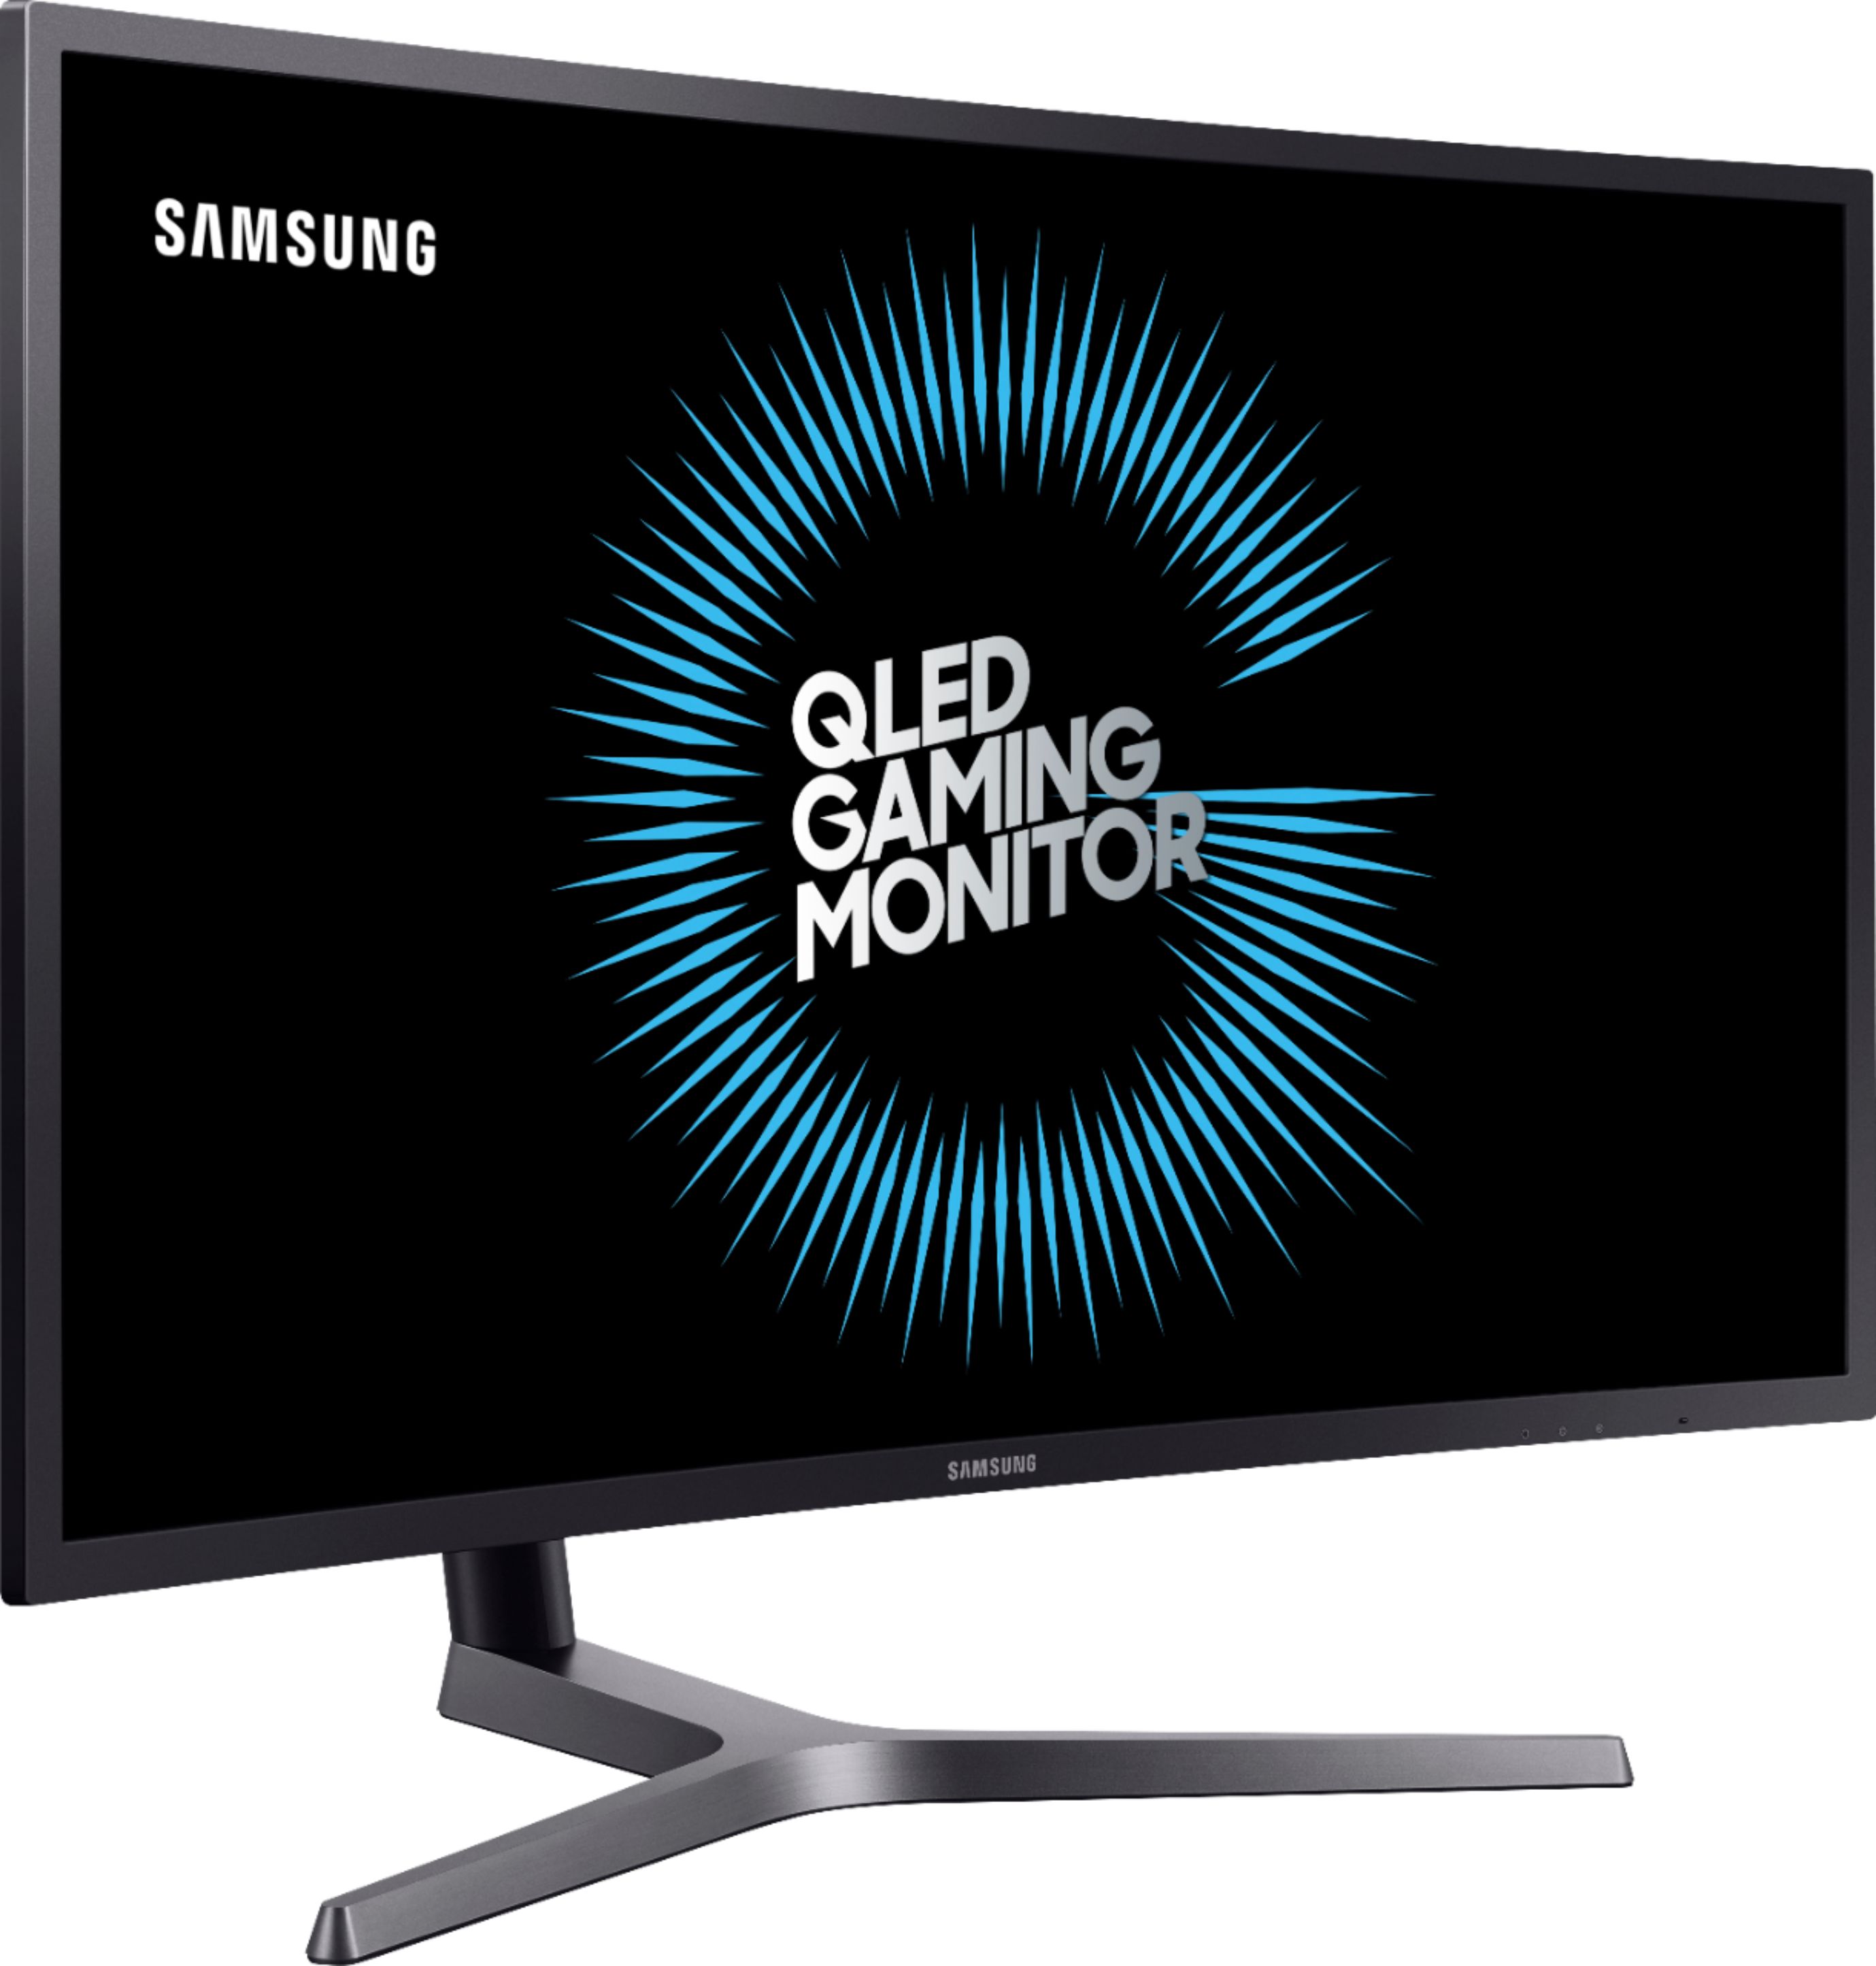 Angle View: Samsung - Geek Squad Certified Refurbished 32" LED Curved QHD FreeSync Monitor with HDR - Matte Dark Blue/Gray